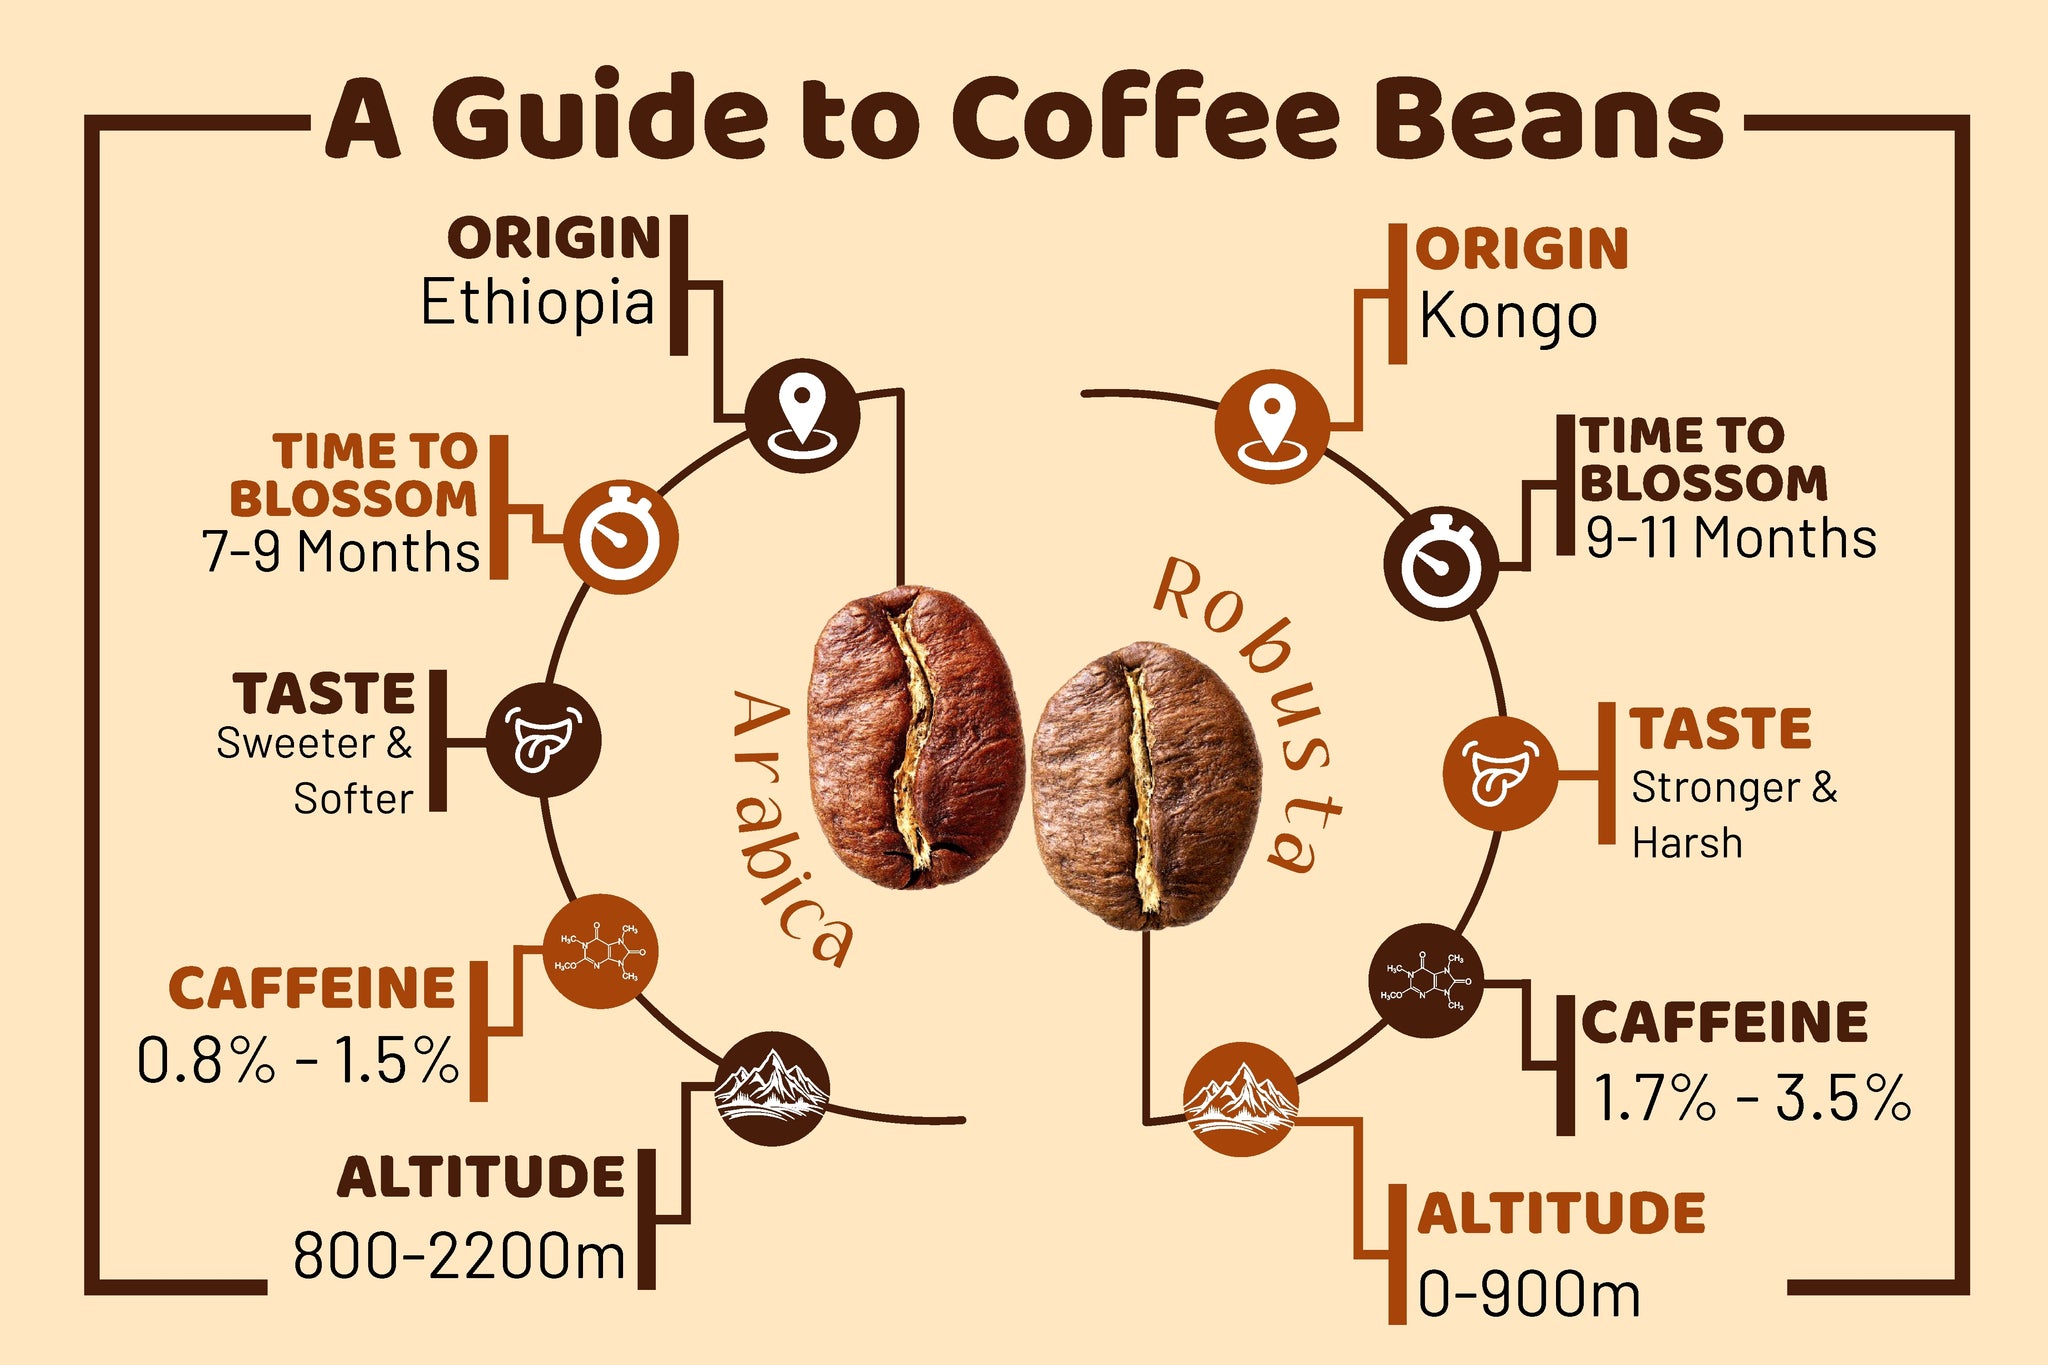 Miscellaneous Uses of Coffee Beans